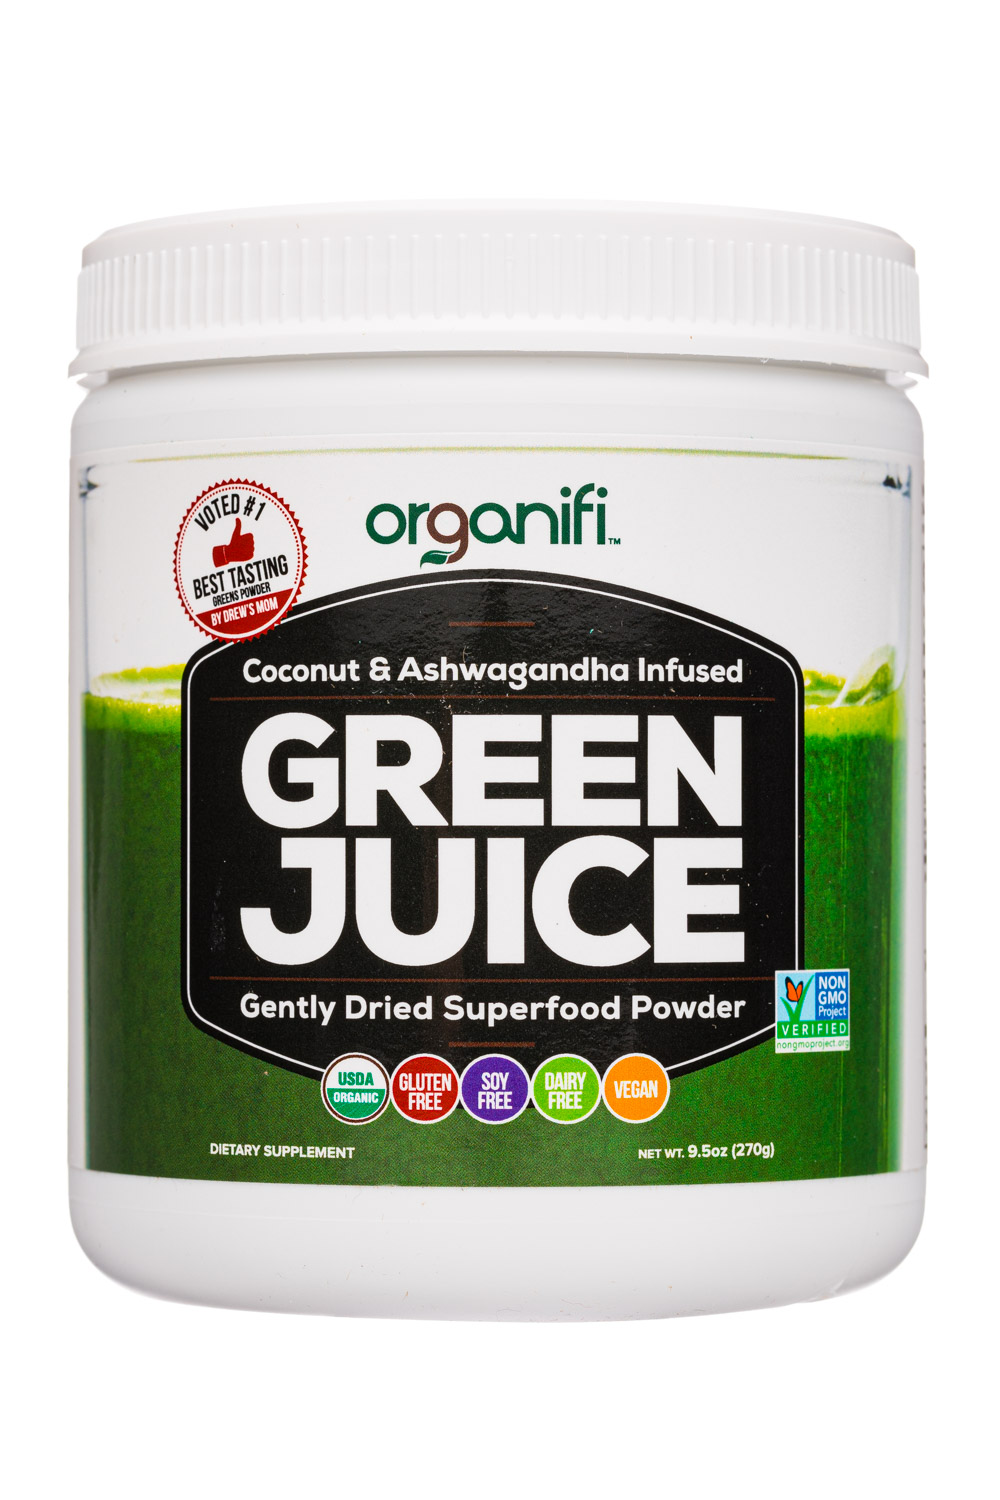 How Organifi Green Juice Review (2021 Upd.) Read Before Buying can Save You Time, Stress, and Money.